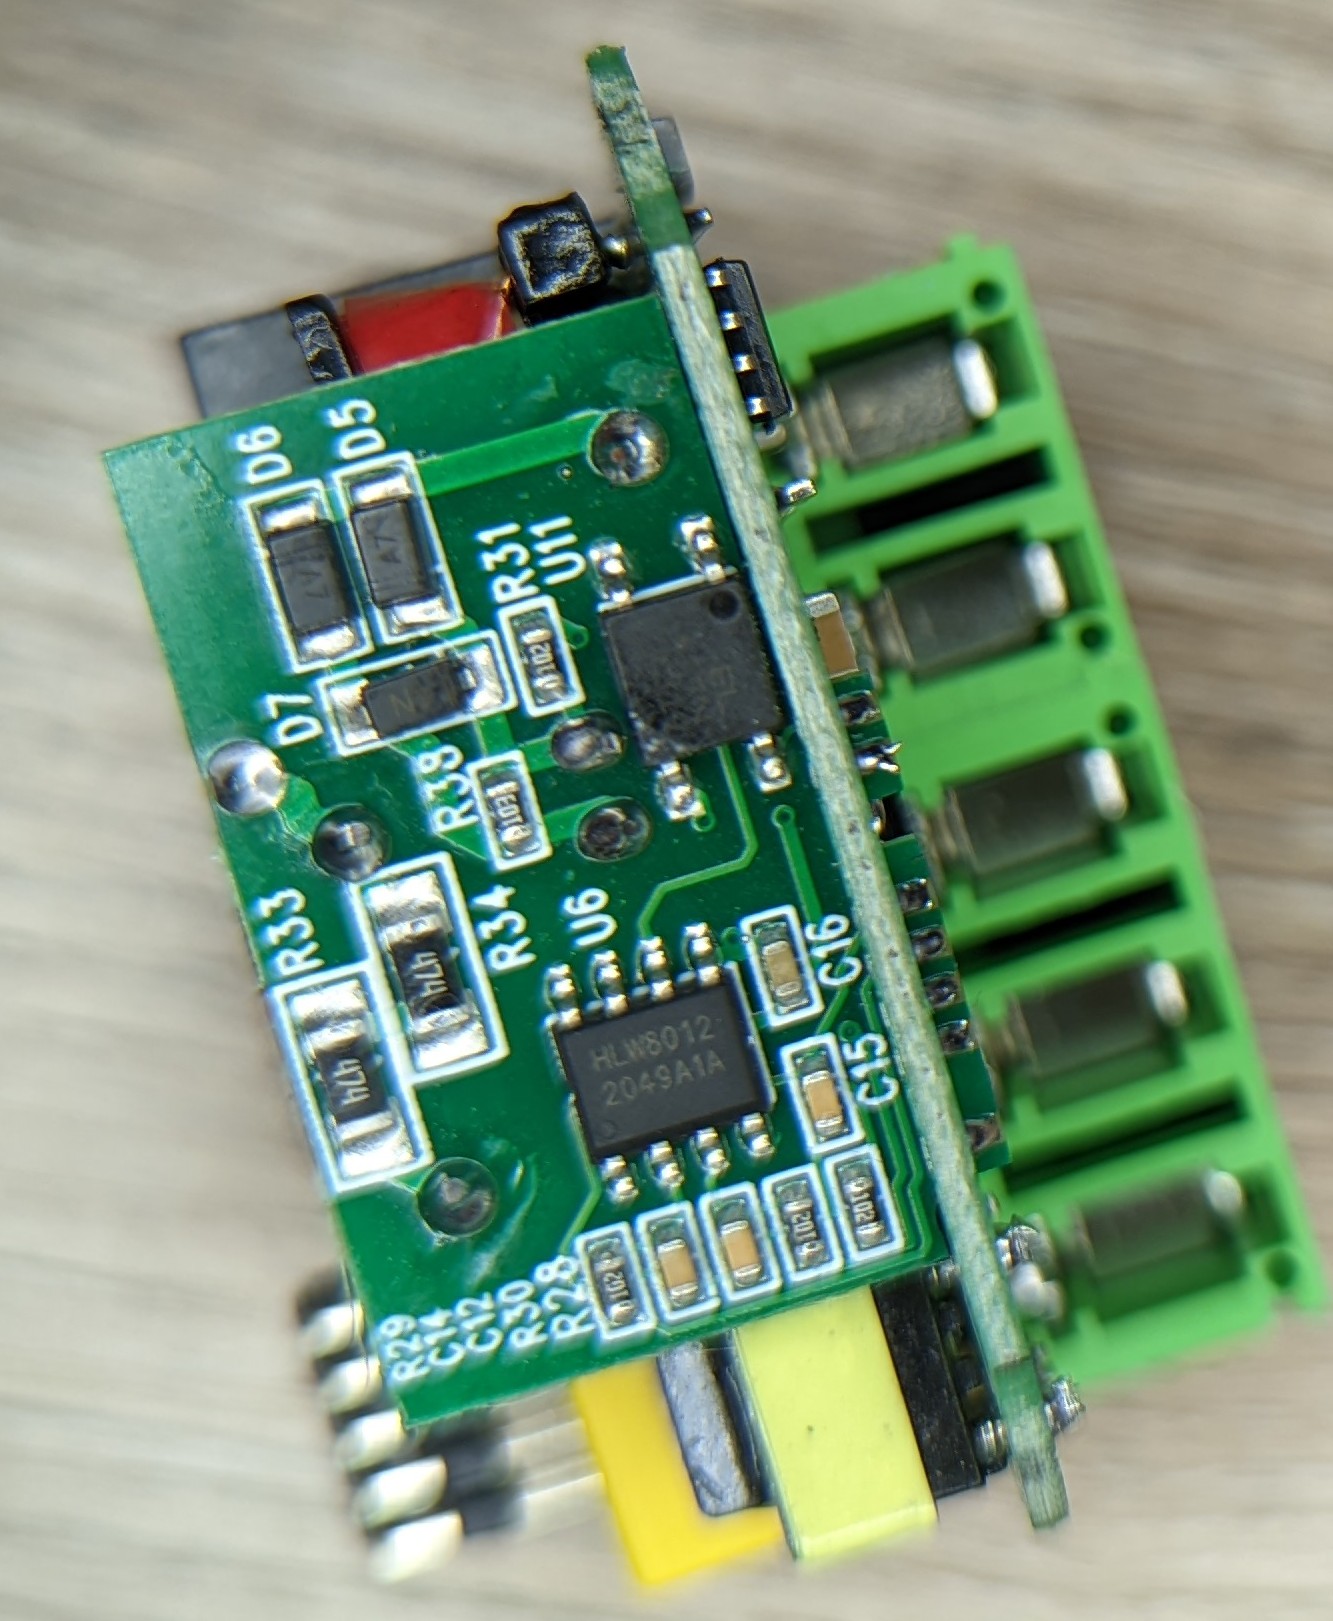 Picture showing a smaller PCB attached to the main power module